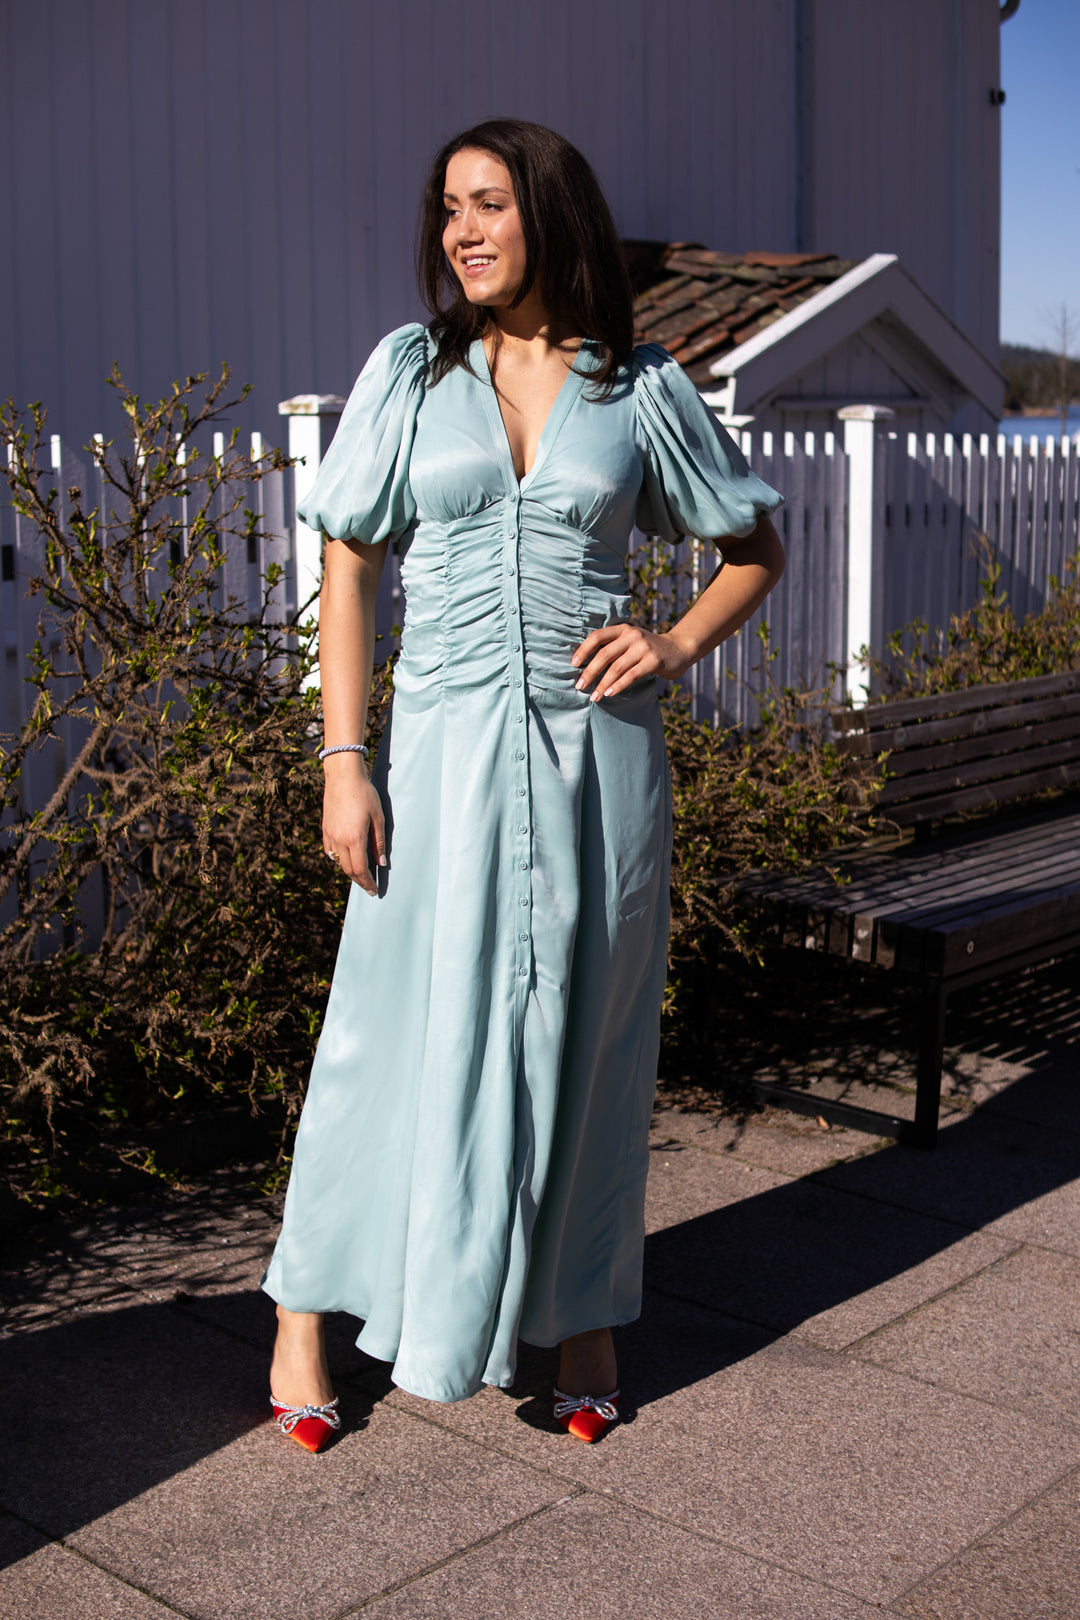 Crepe Satin Rouching Gown - Turquoise - Kjoler - Helt Dilla AS